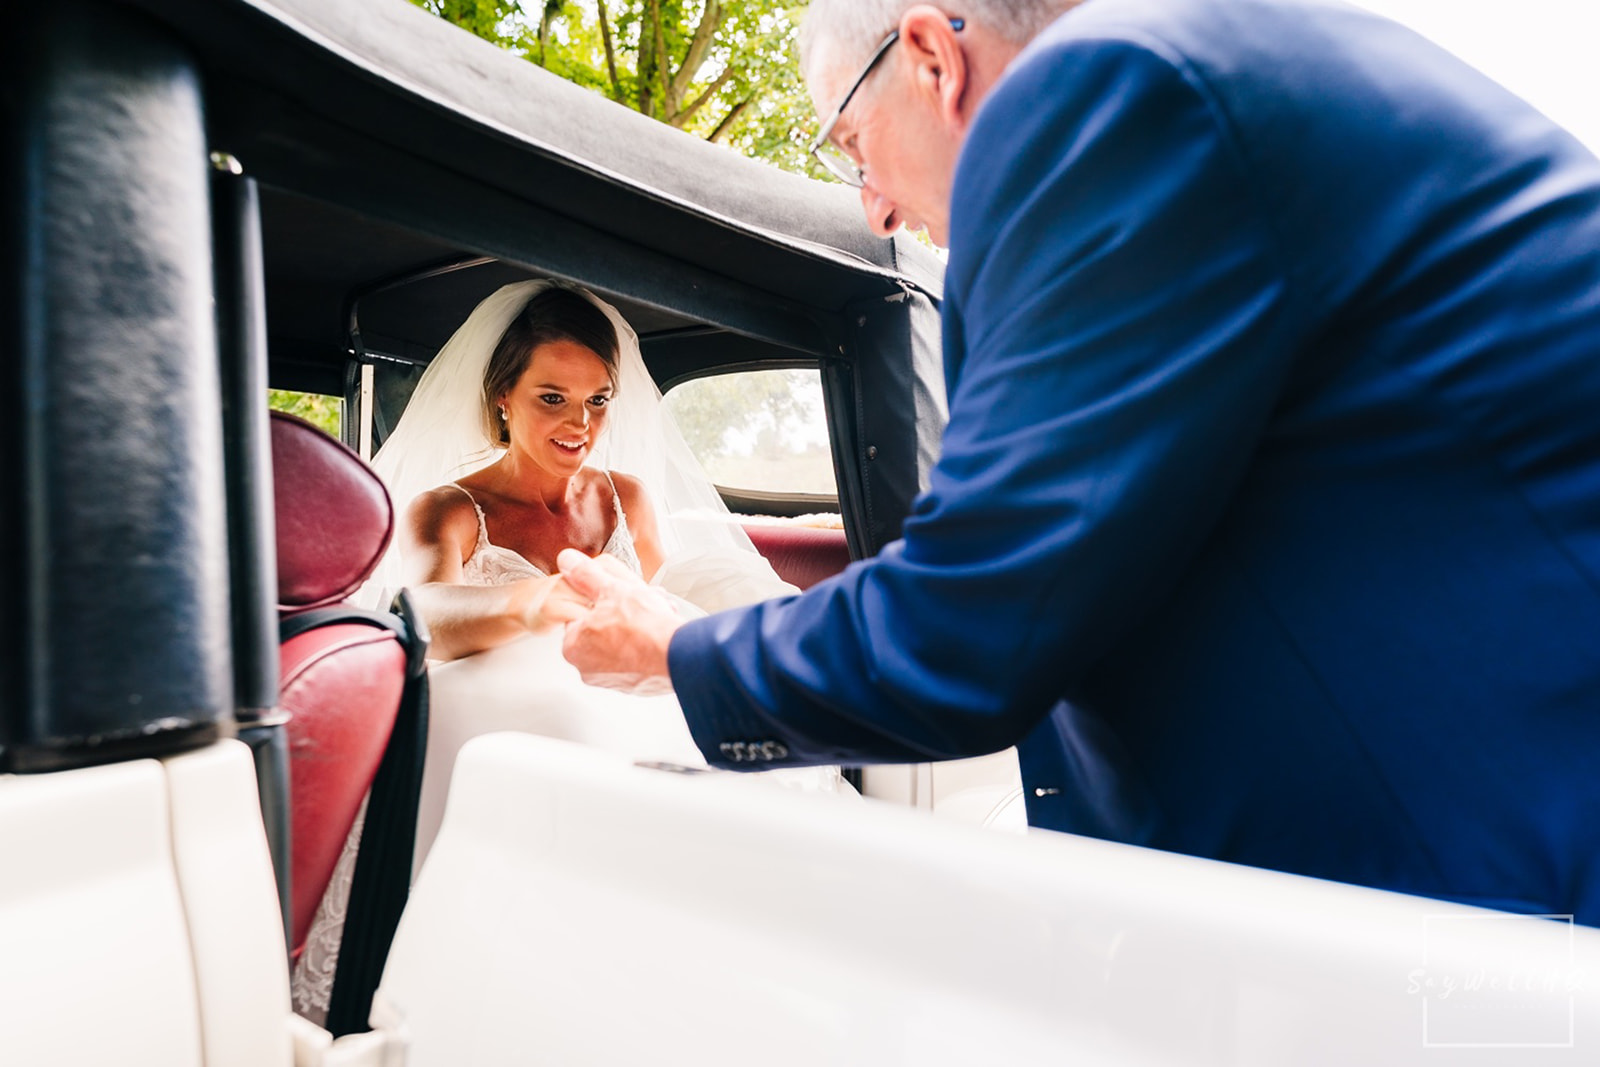 Documentary Wedding Photography Portfolio - Andy Saywell - bride arrives for her wedding in a white wedding car